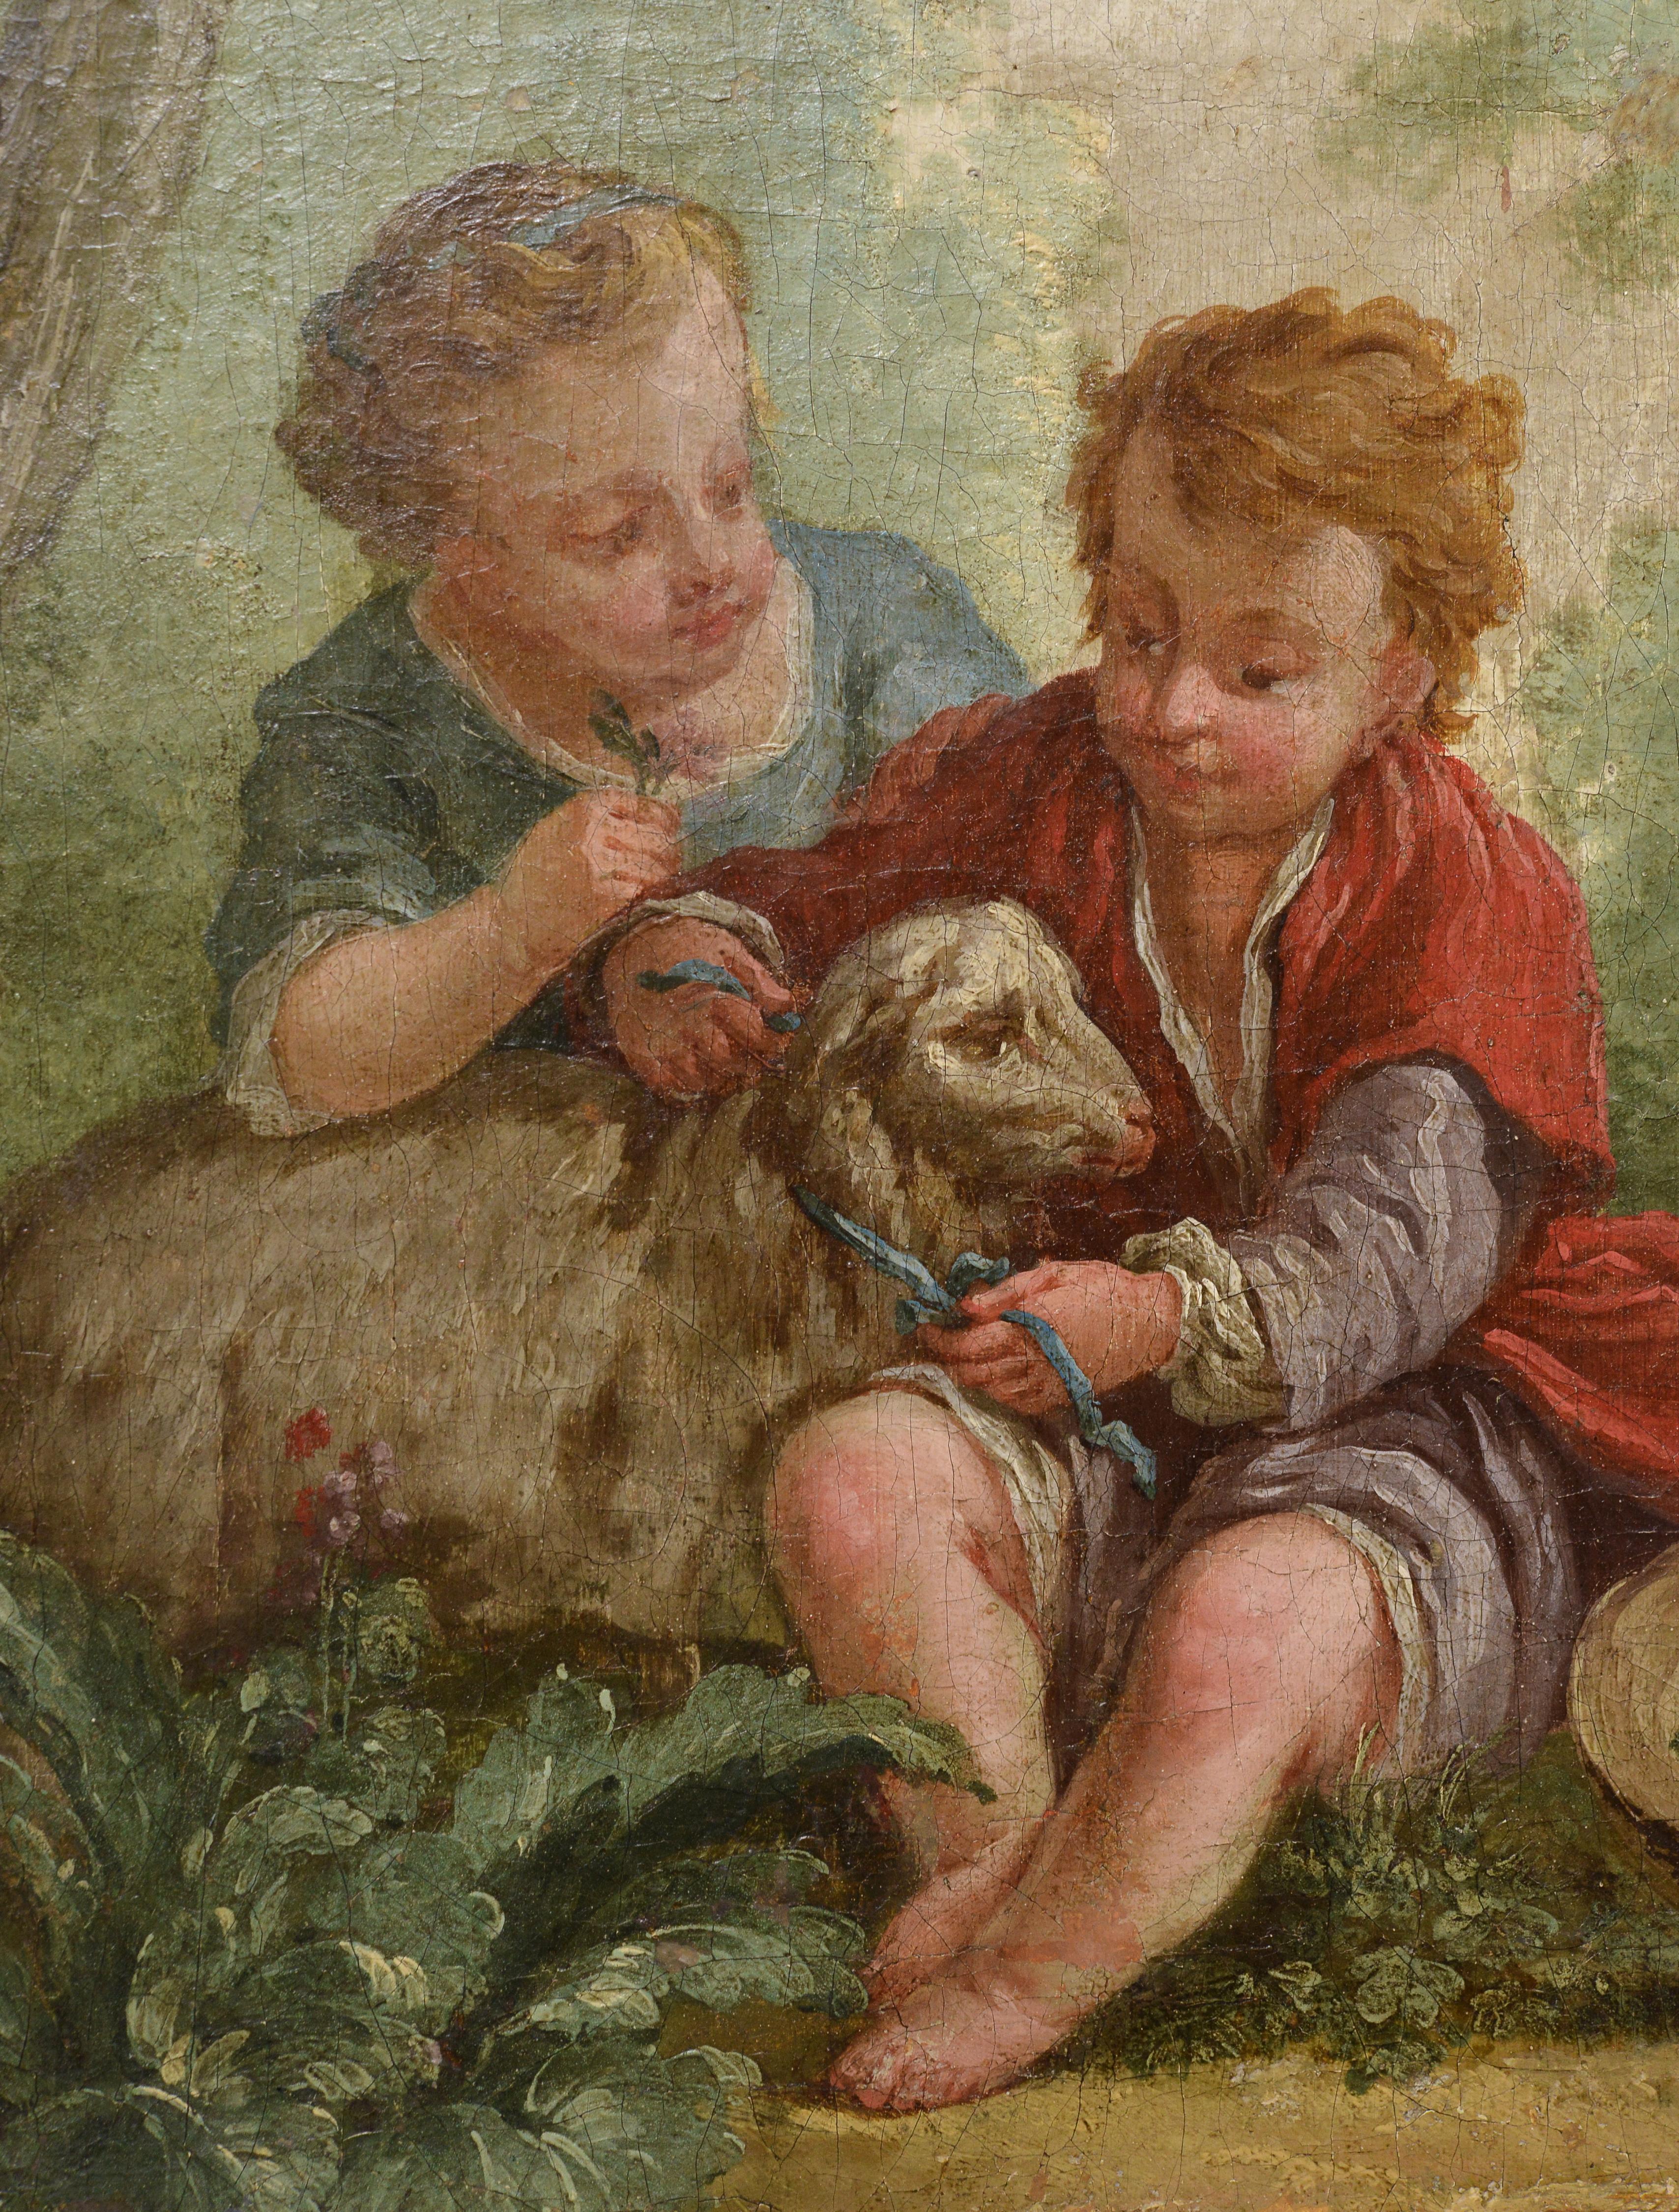 Children w Lamb Scene 18th century Oil painting by French Rococo Master - Brown Animal Painting by Jean Baptist Marie Huet